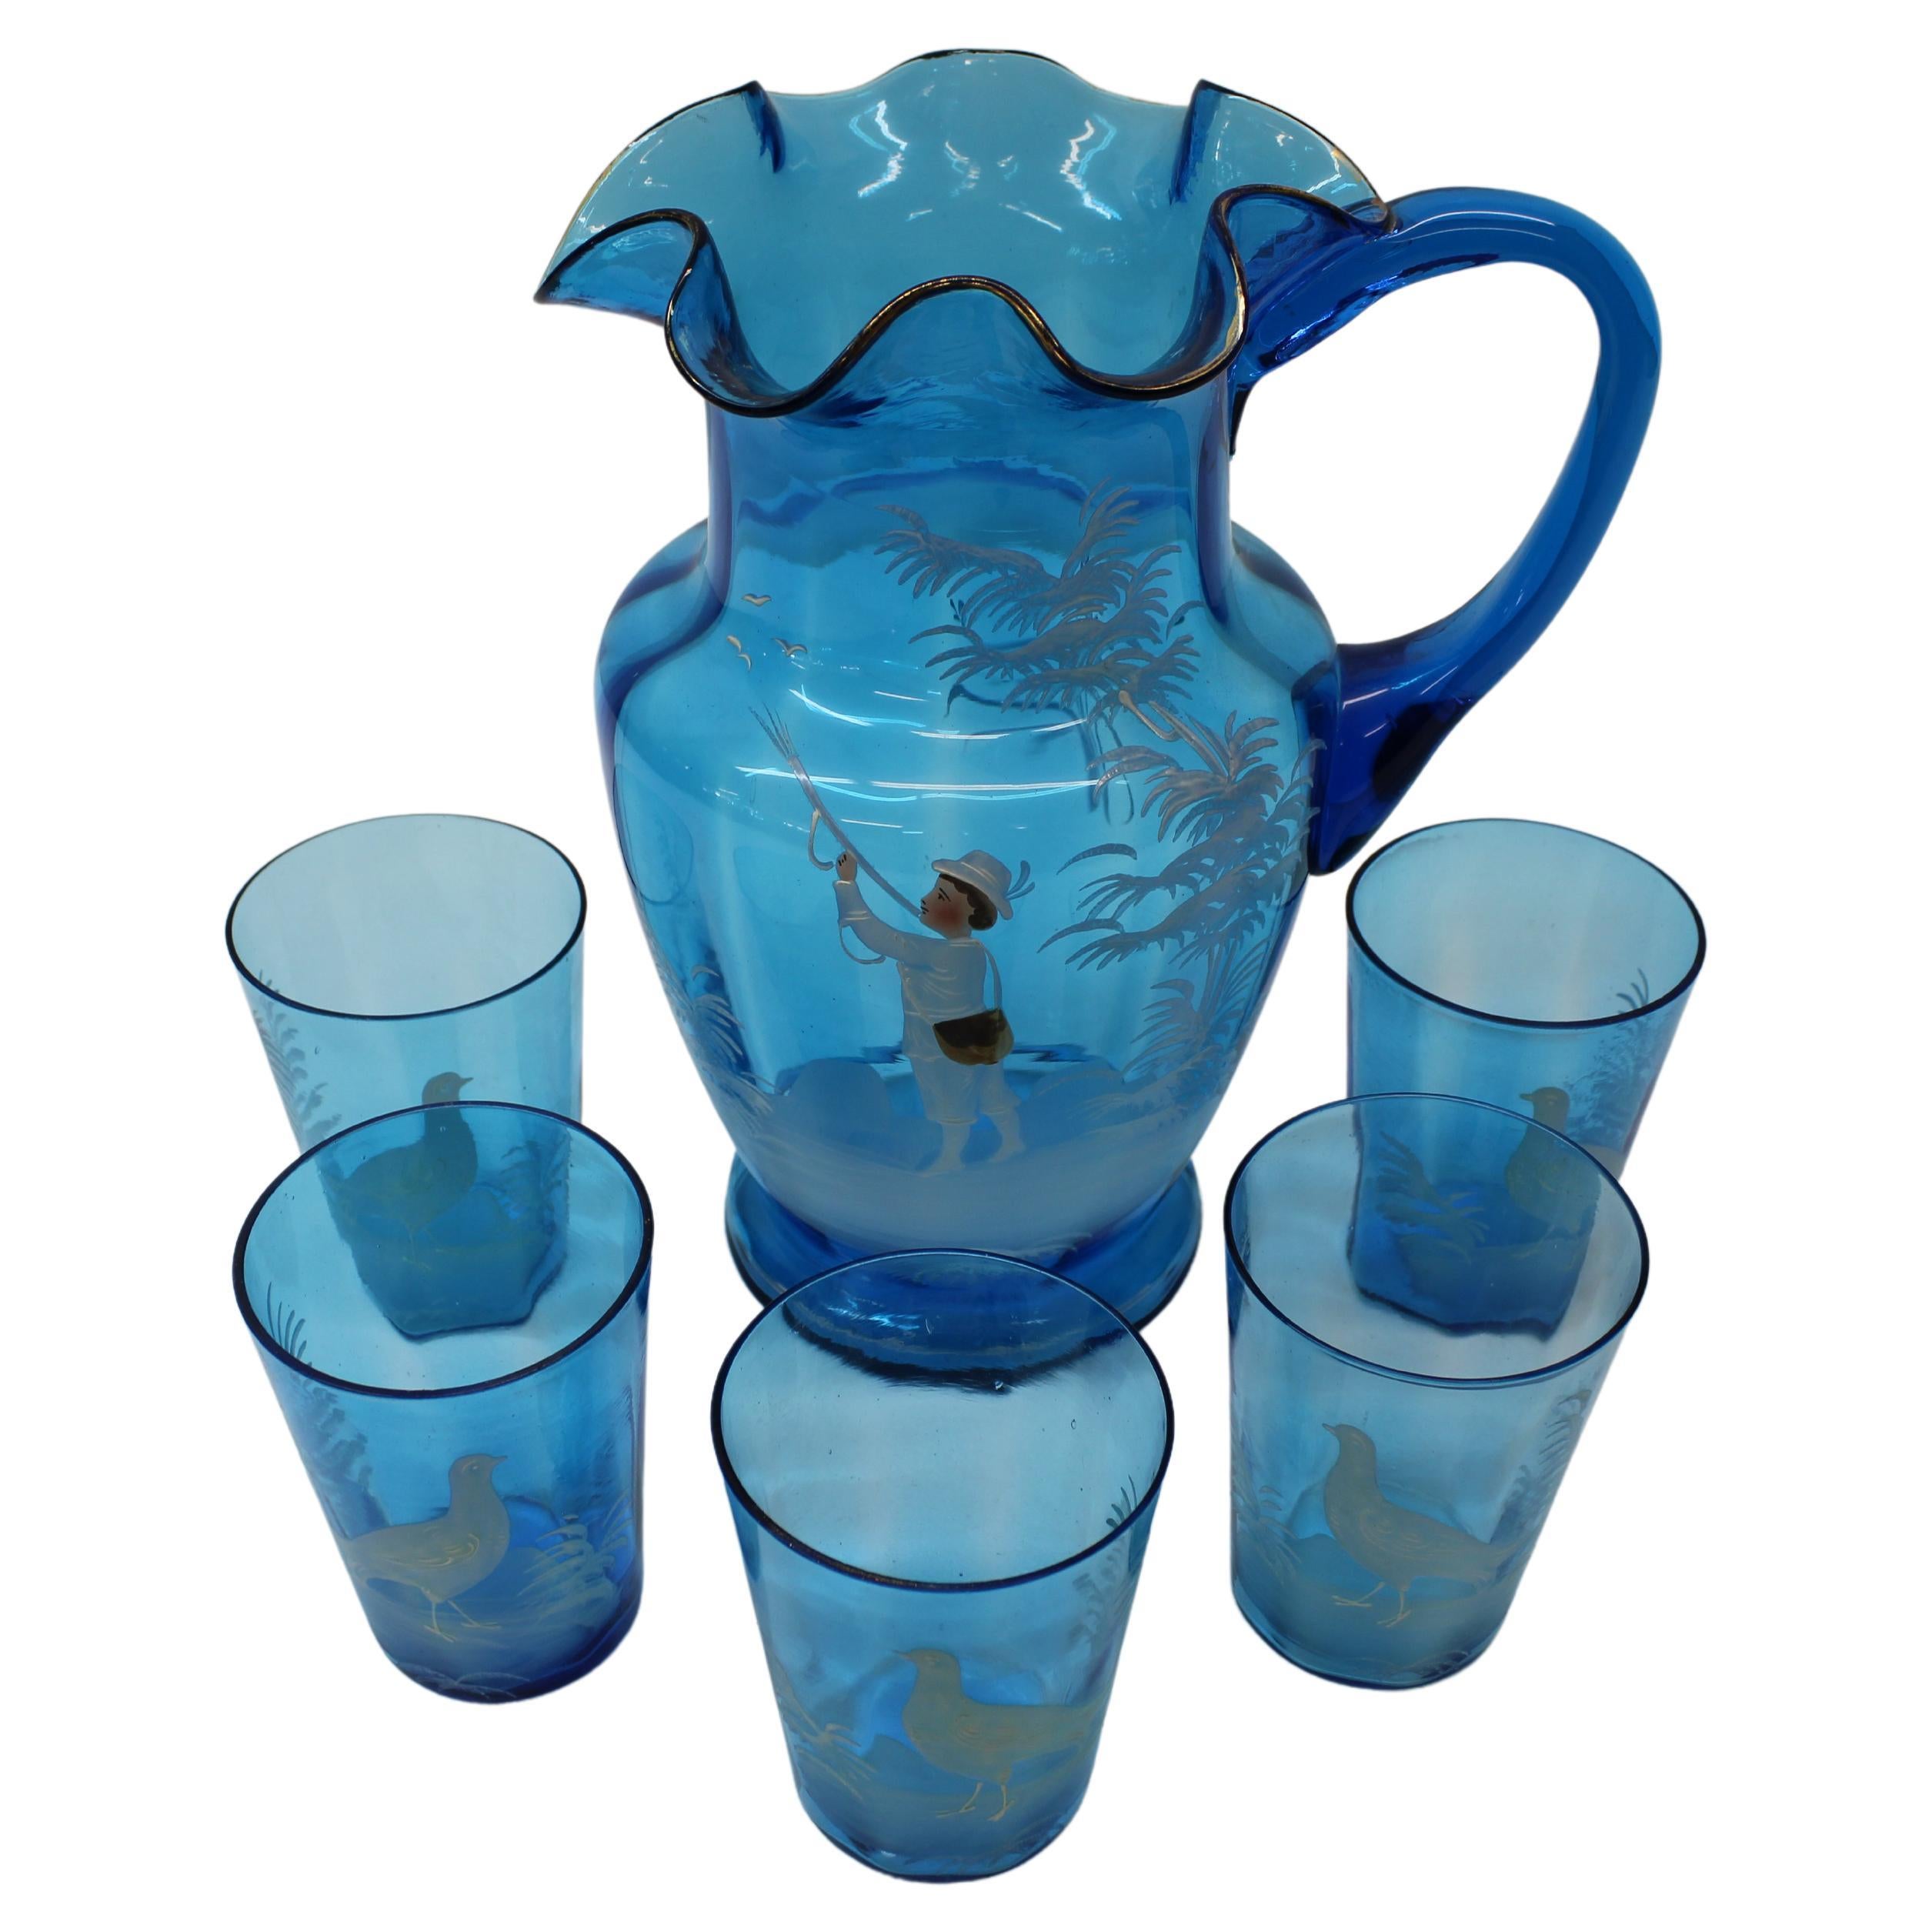 C. 20th century beautiful Victorian ( Mary Gregory ) blue glass pitcher w/ 5 adorable tumblers, hand painted / hand blown enamel.
Whether it be 